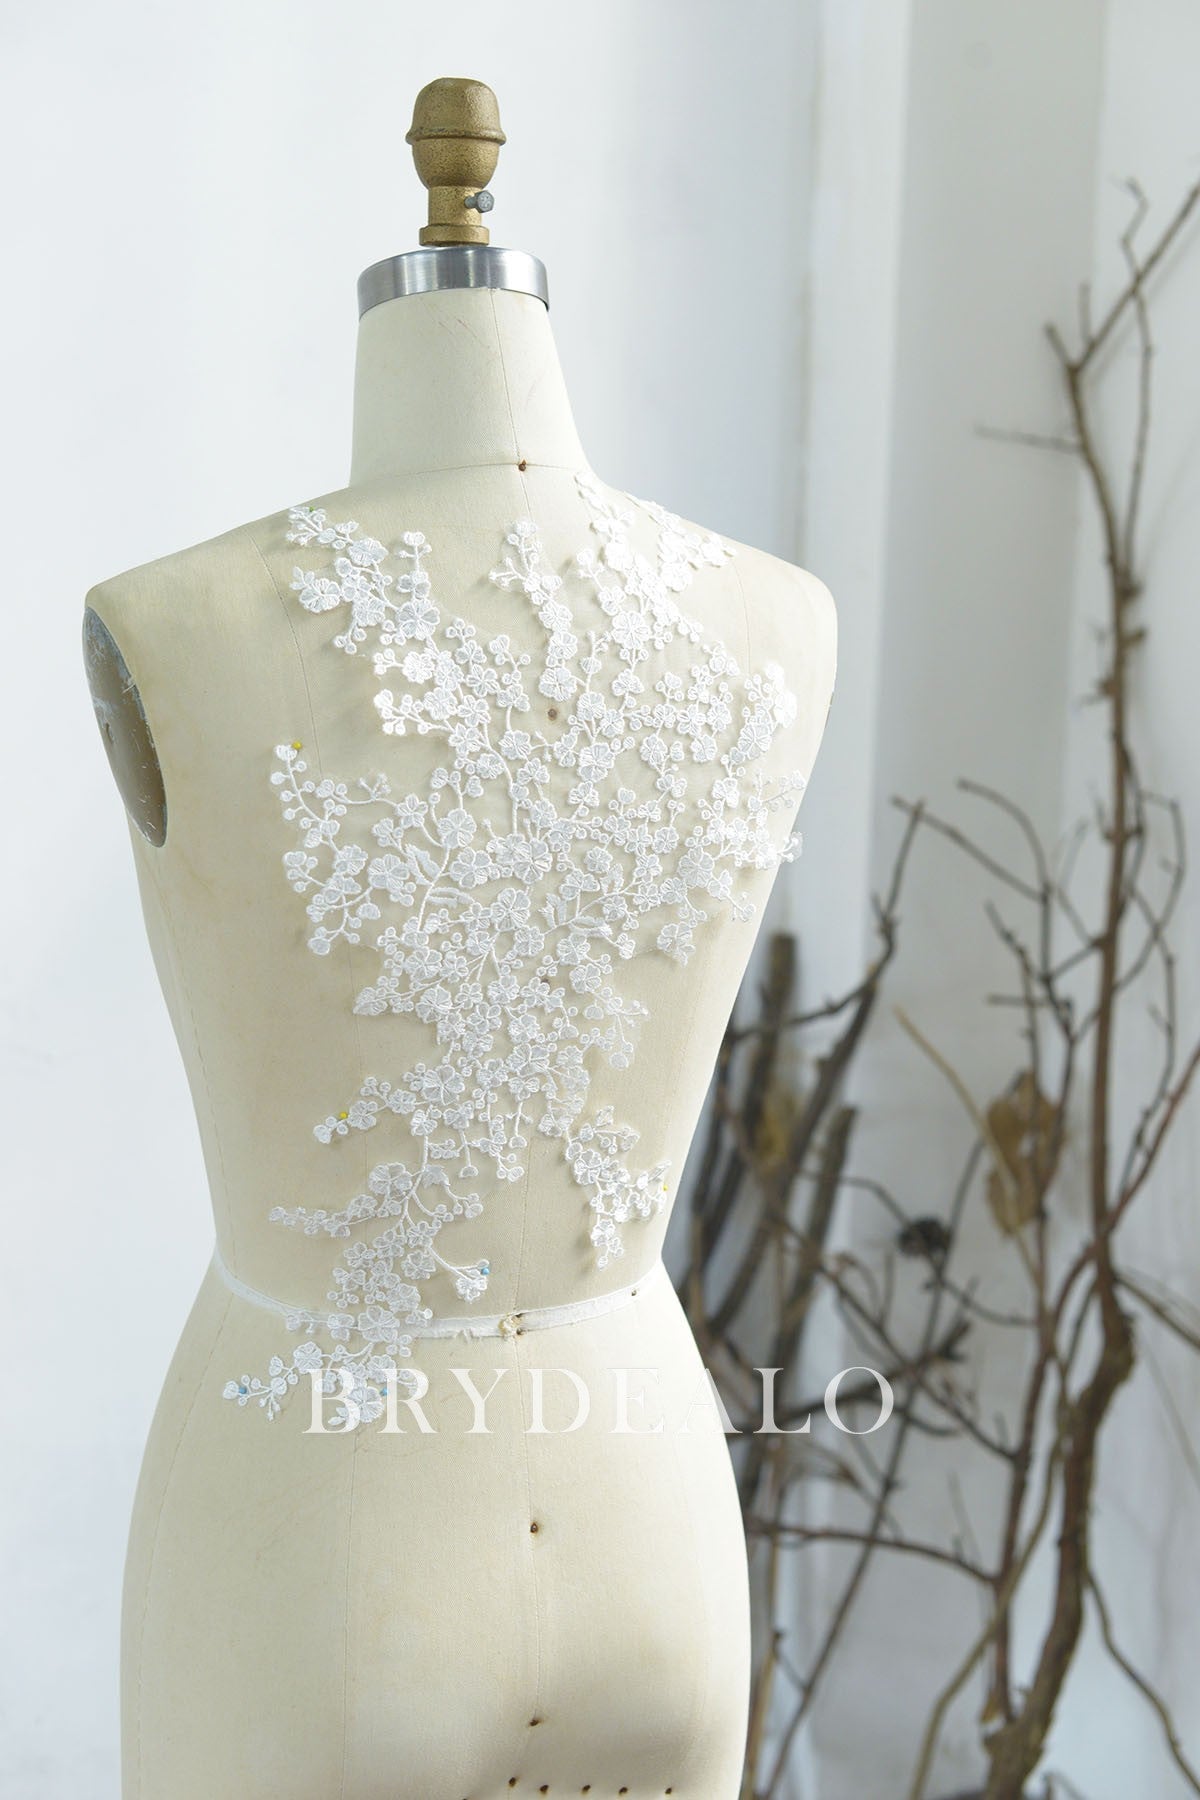 Pony Flower Embroidery Bridal Lace Appliques